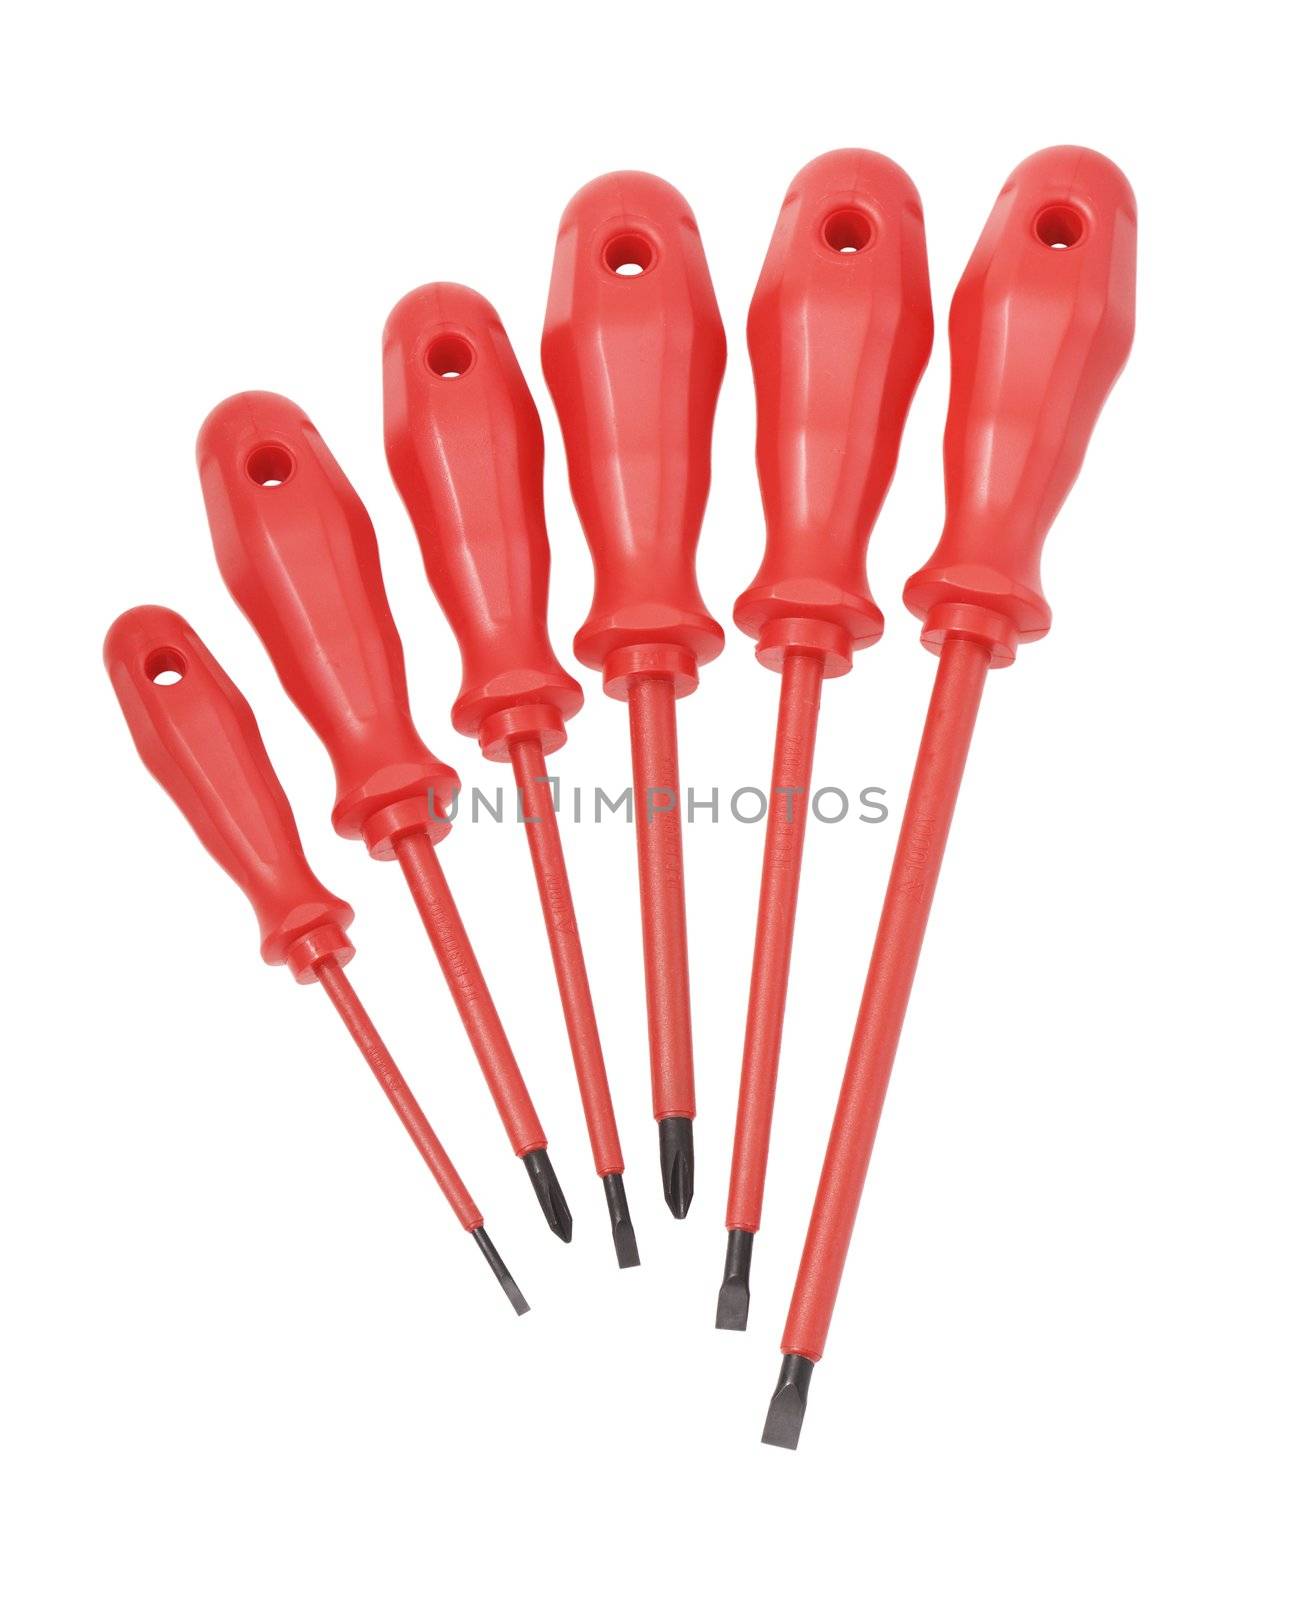 A Set of electrician's insulated screwdrivers.